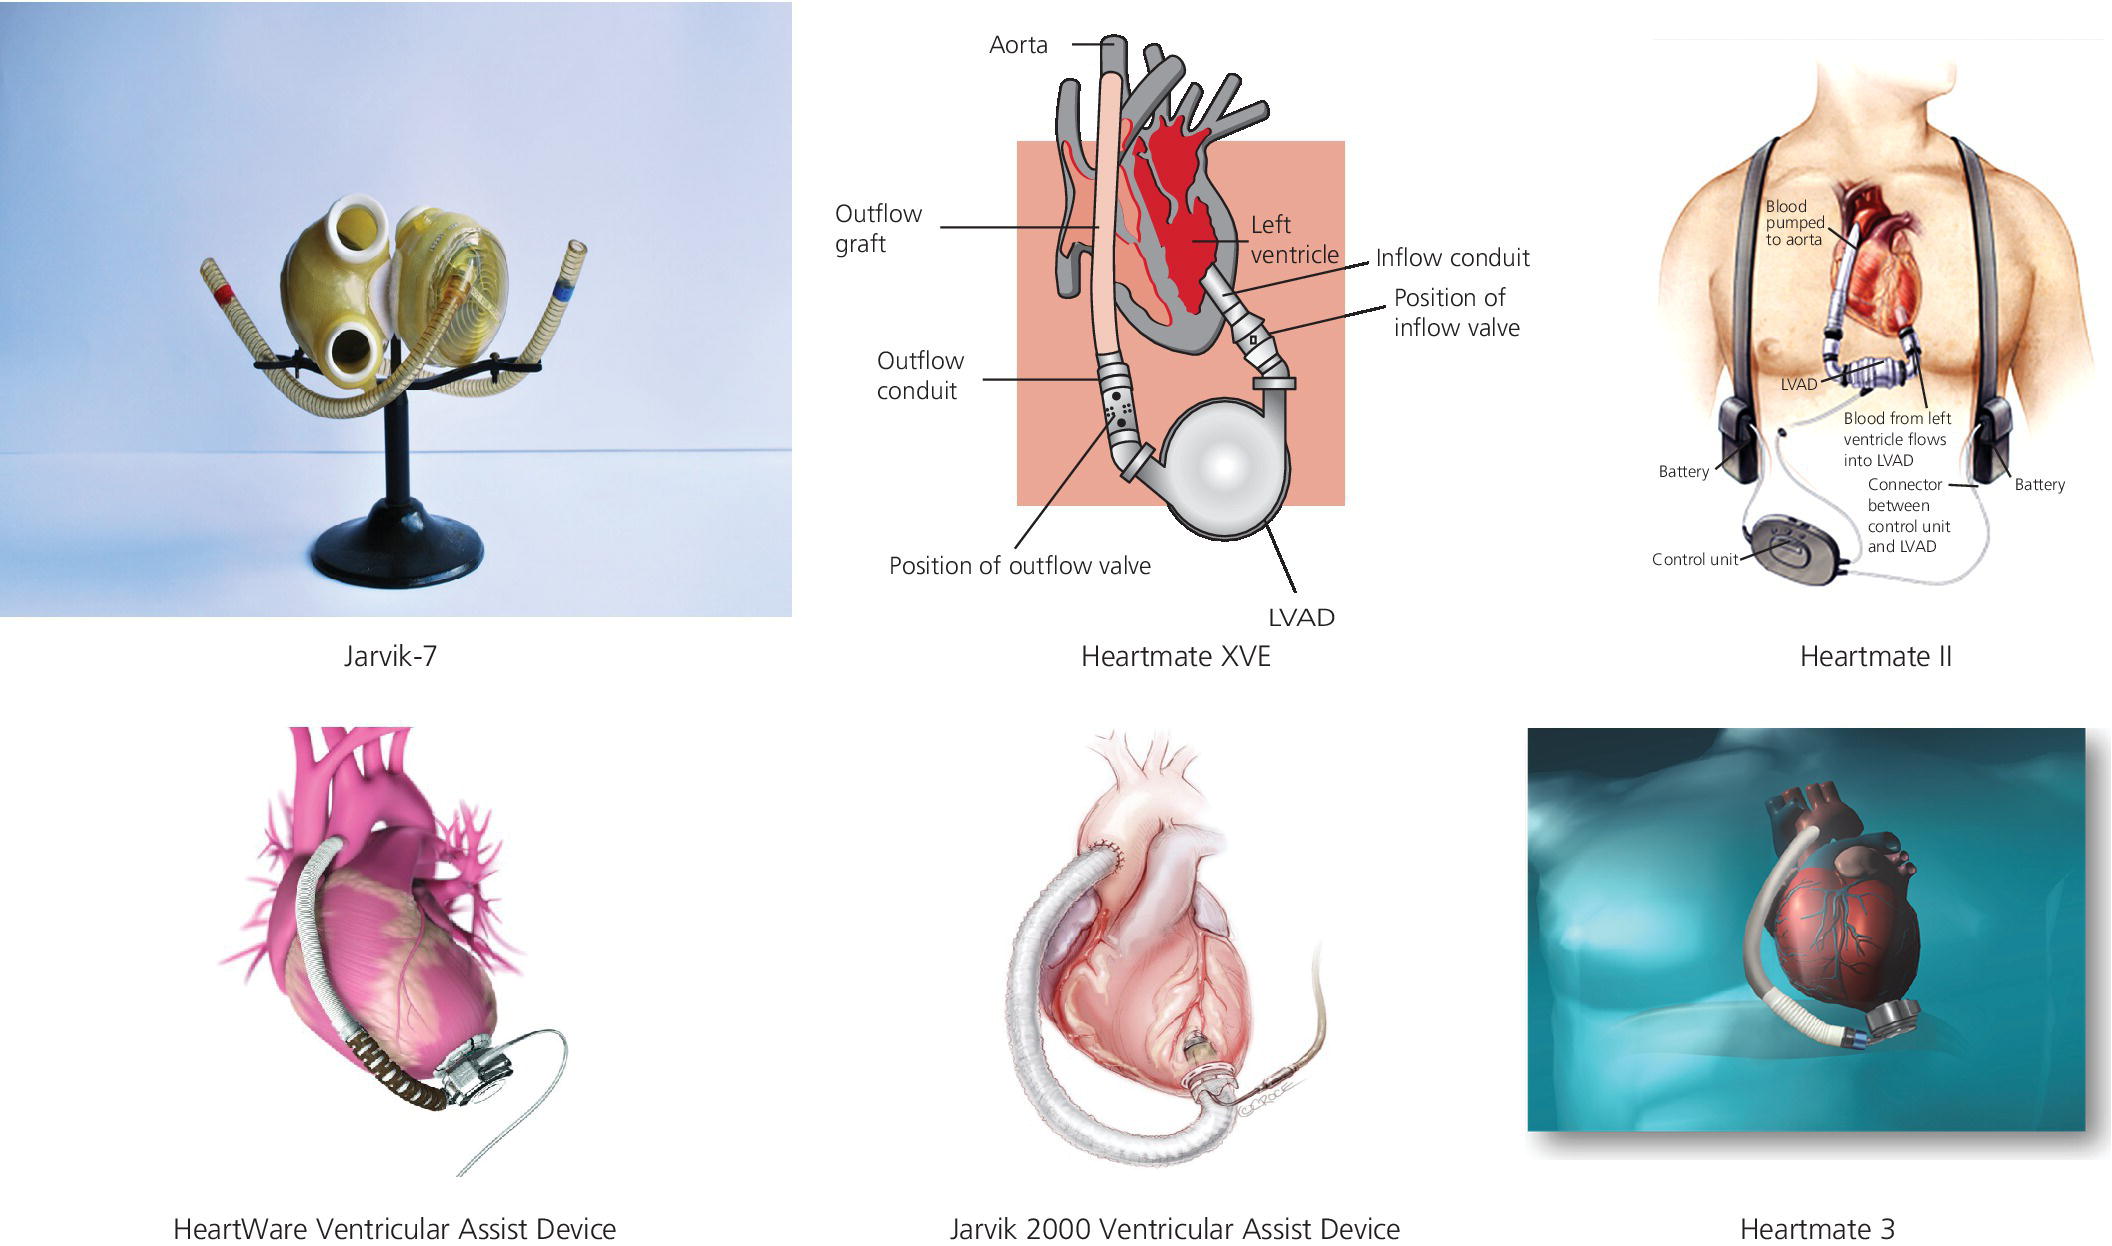 Photo of Jarvik-7 and schematics of Heartmate XVE, Heartmate II, HeartWare ventricular assist device, Jarvik 2000 ventricular assist device, and Heartmate 3 for the different types of mechanical cardiac devices.